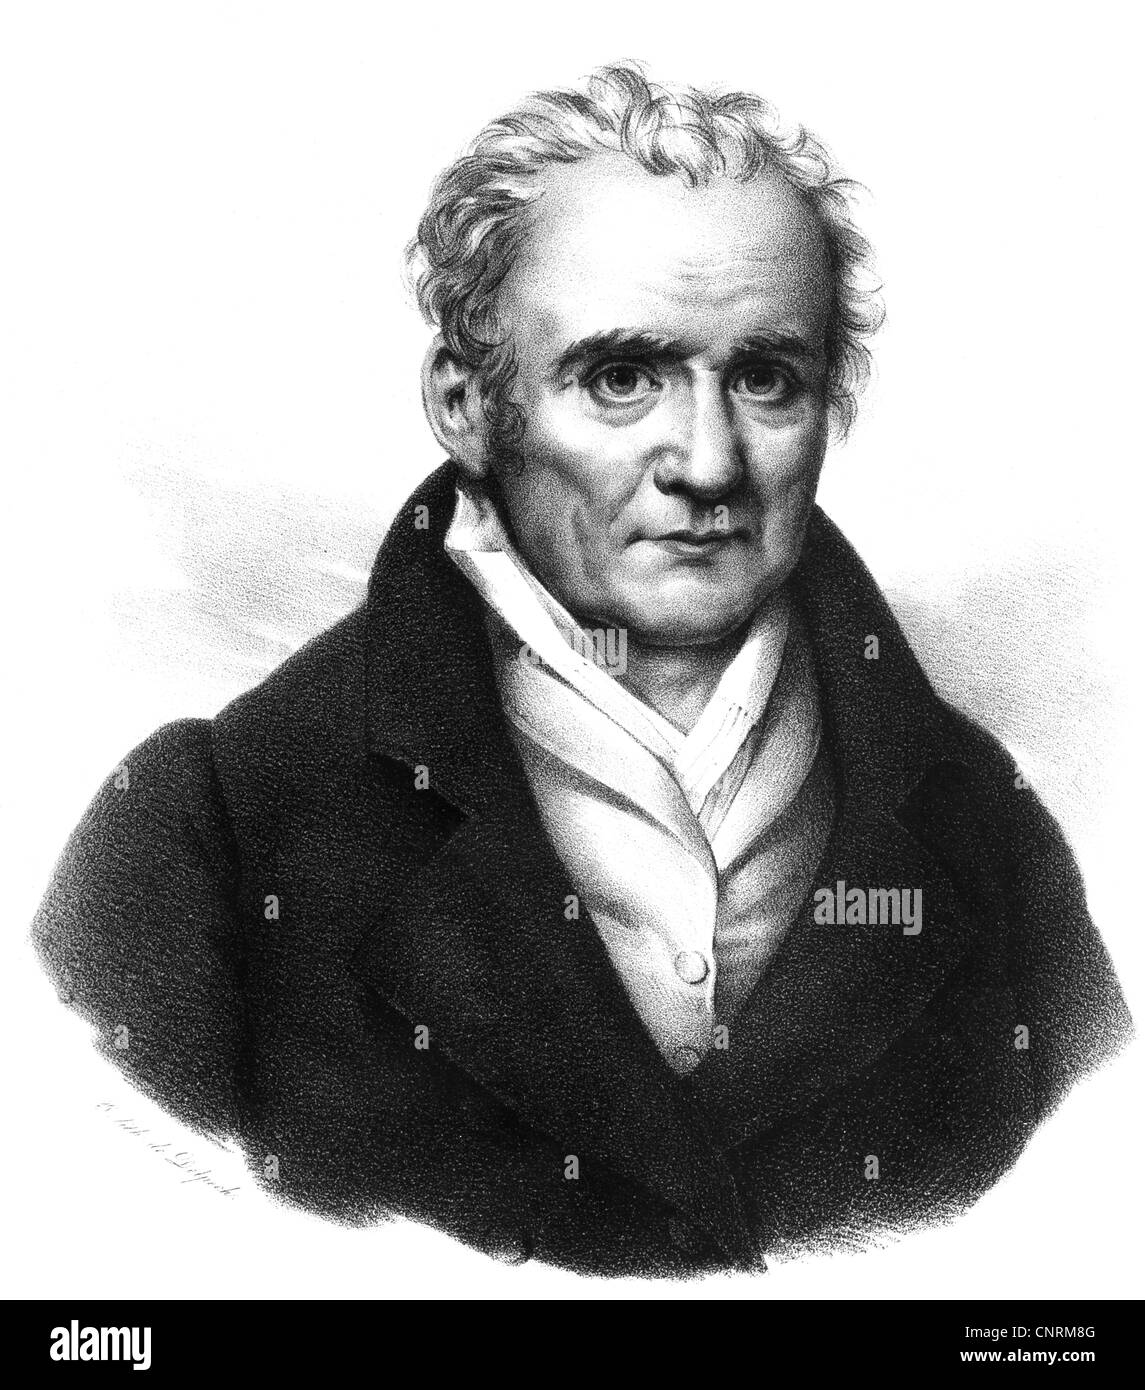 Monge, Gaspard, 9.5.1746 - 28.7.1818, French mathematician, physicist, portrait, lithograph by Delpech, according to Hesse, 19th century, Stock Photo